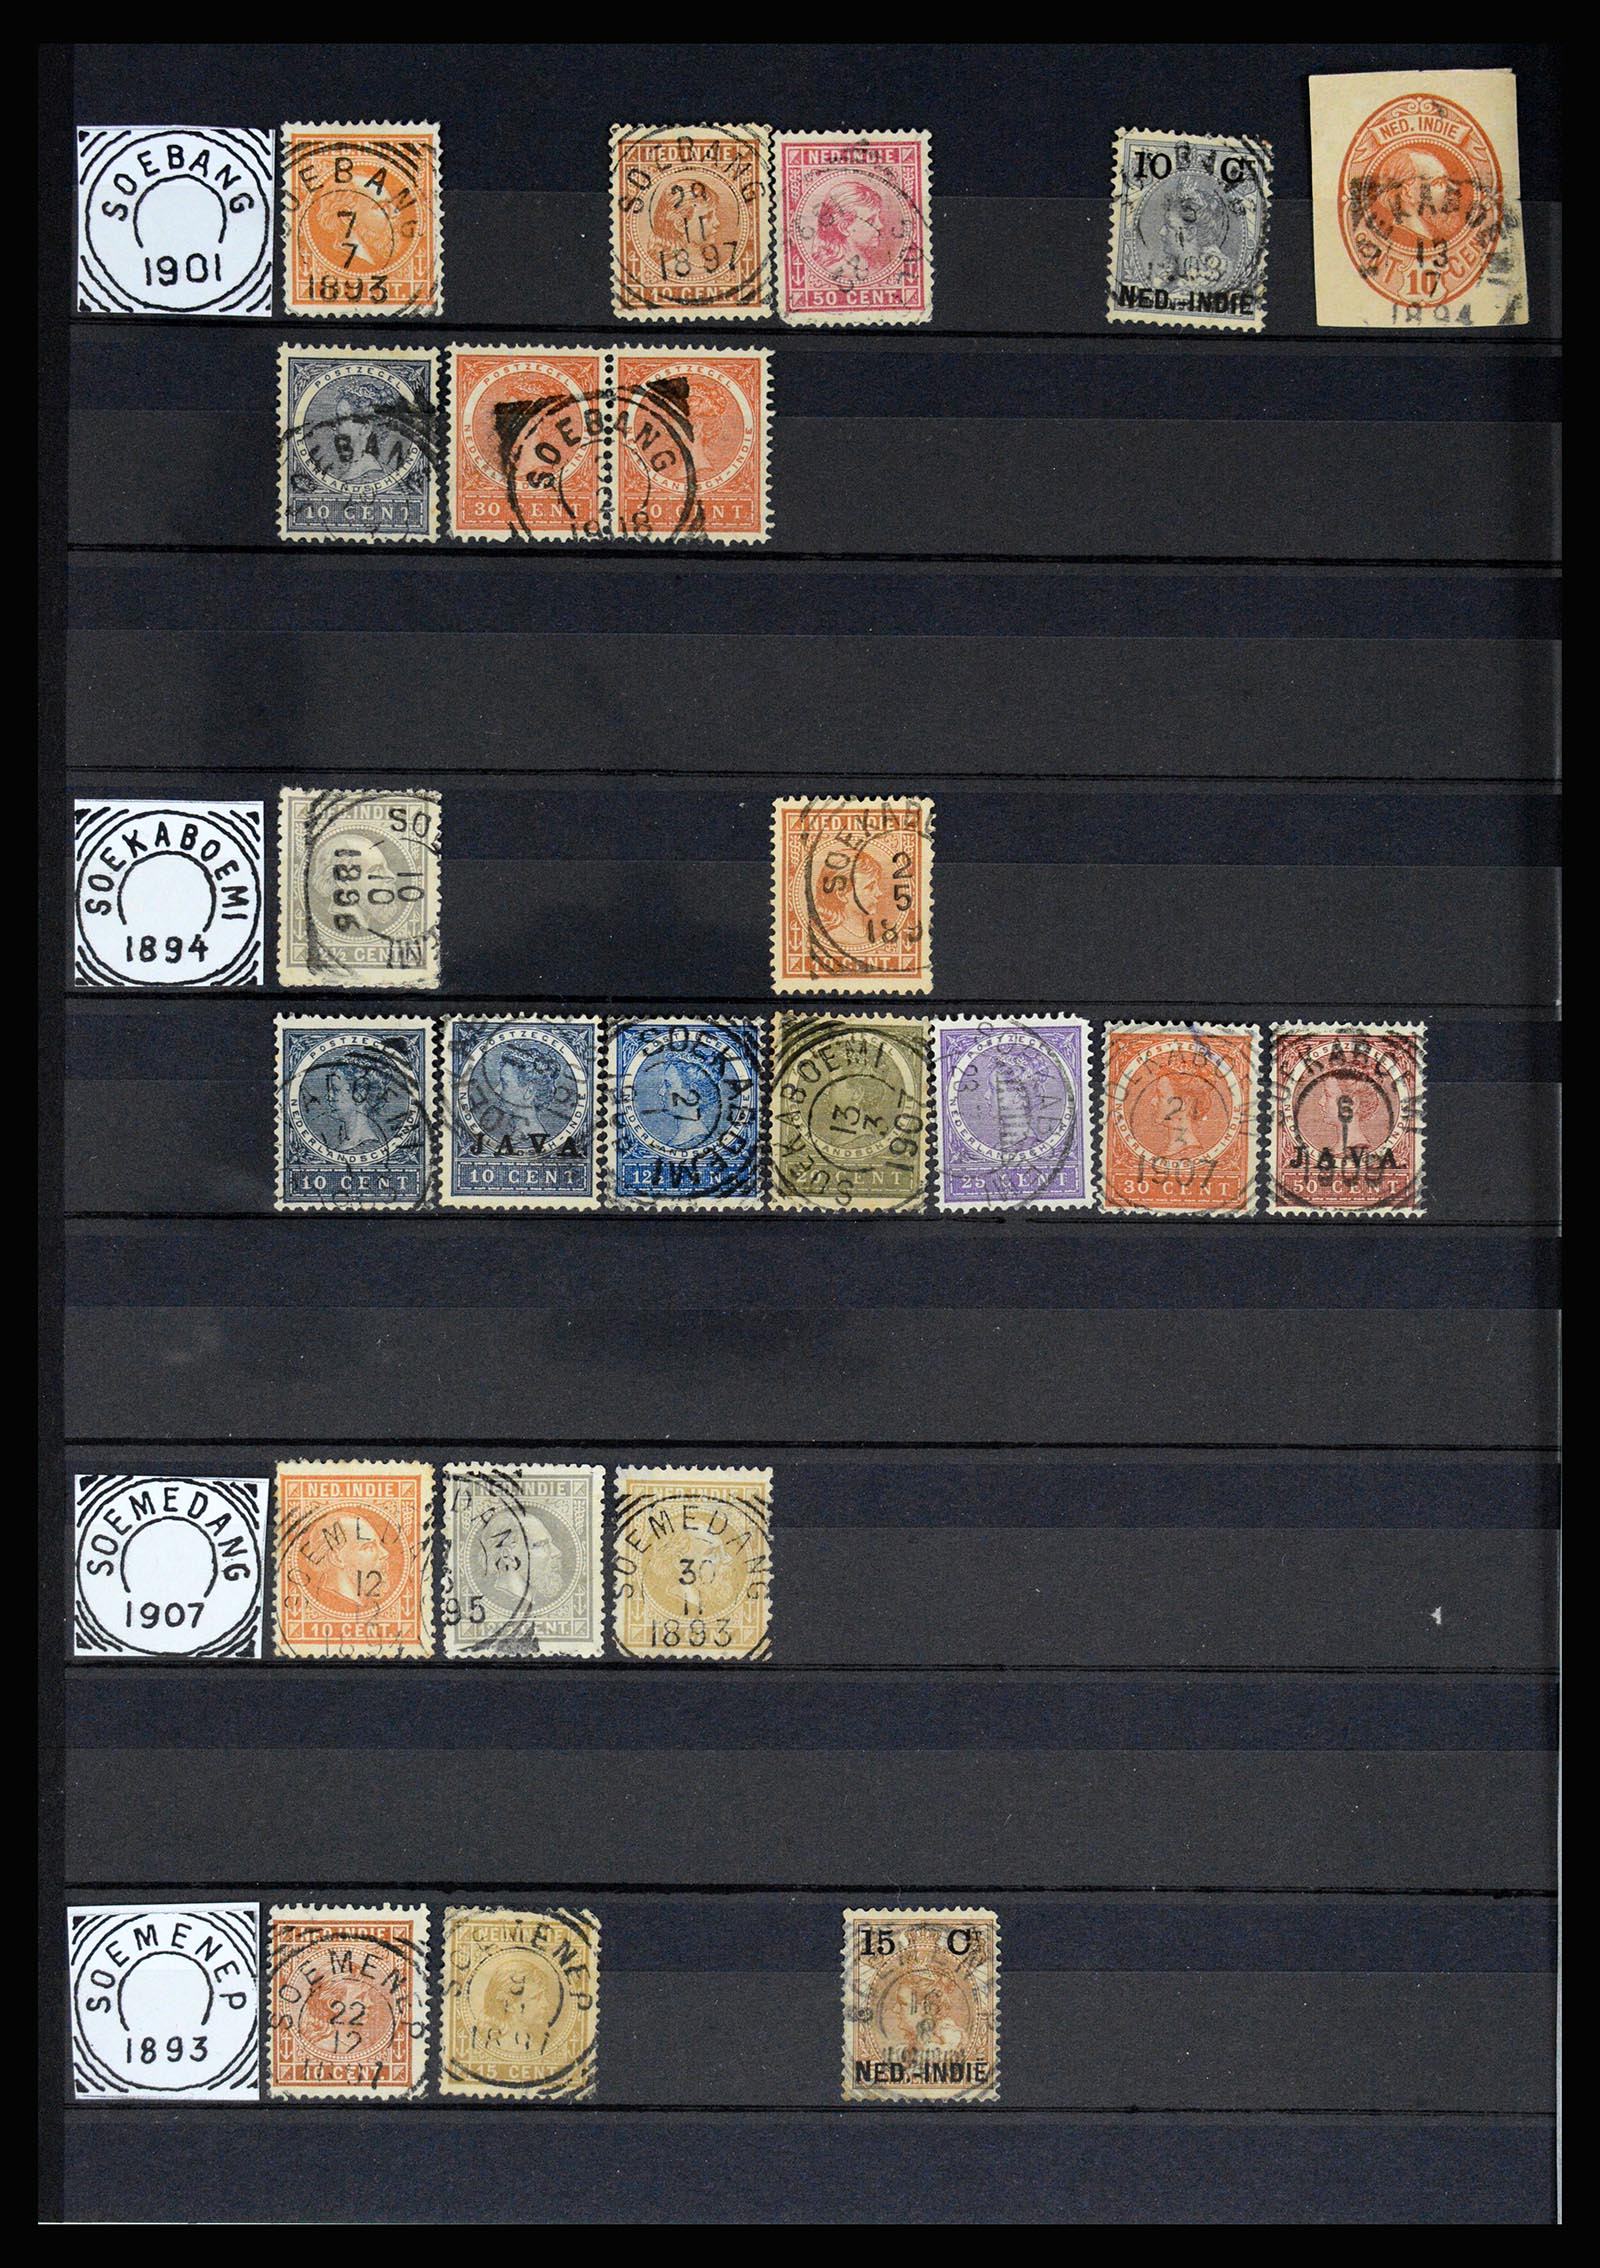 36839 049 - Stamp collection 36839 Dutch east Indies square cancels.